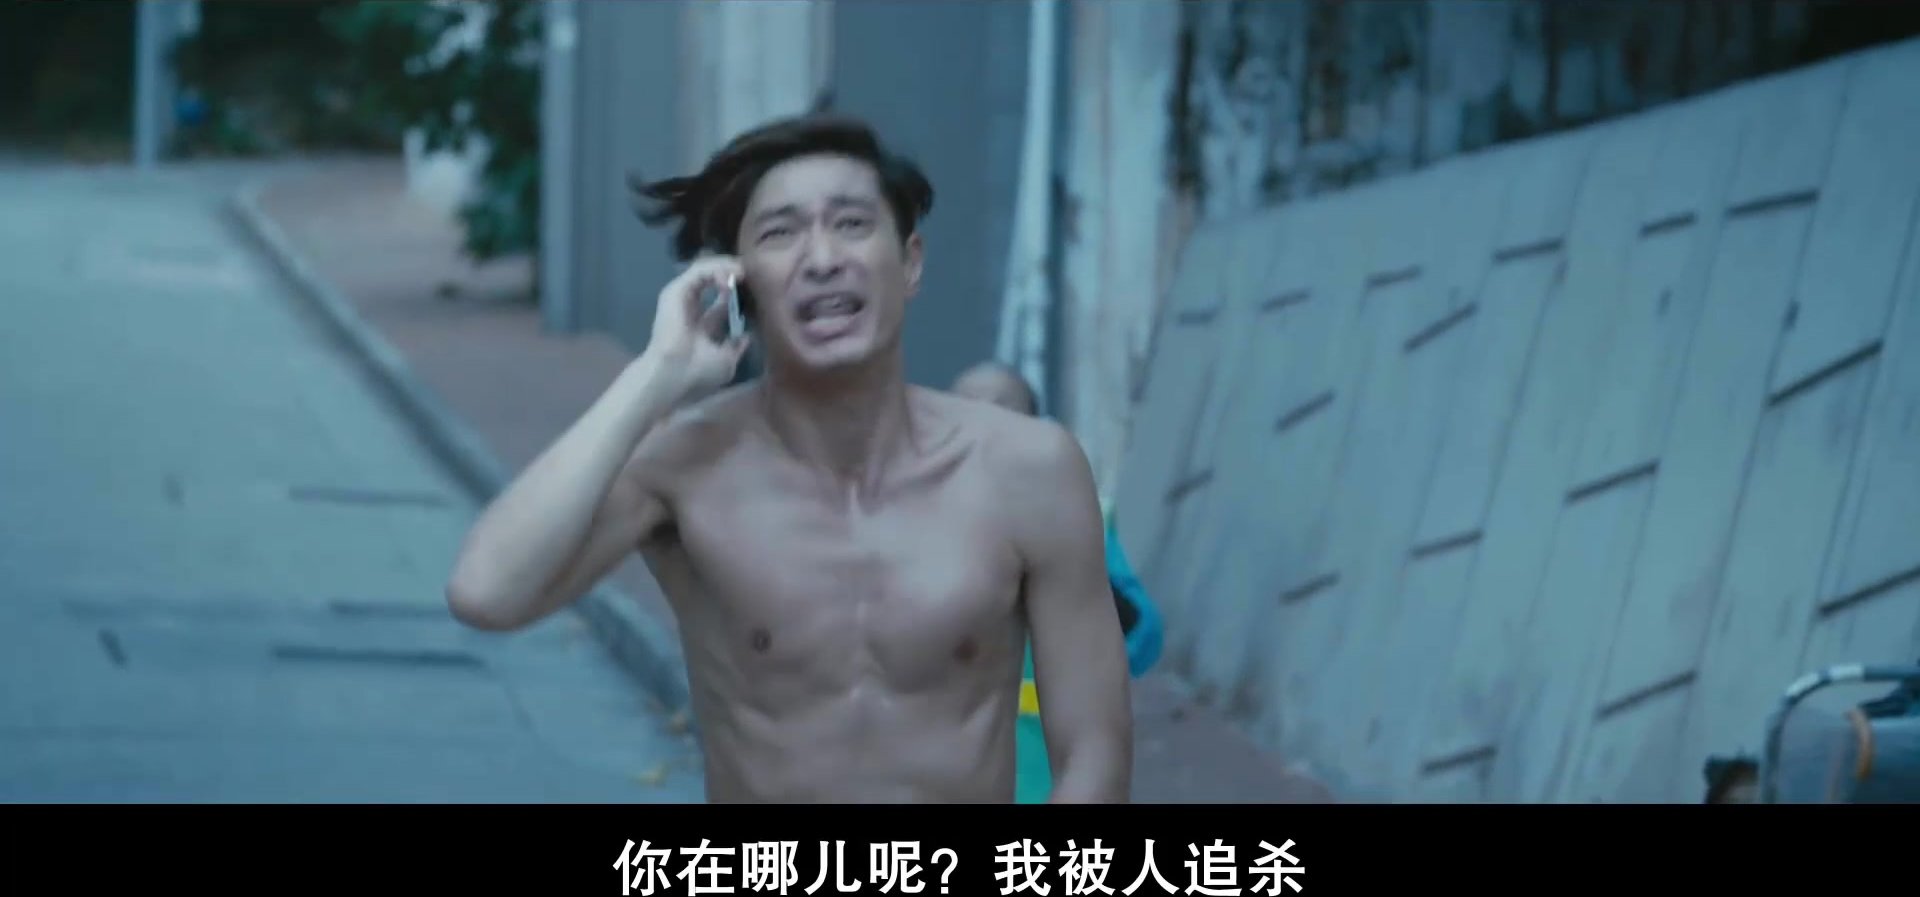 Prank by Friends: Chinese Guy Ran and Getâ€¦ ThisVid.com